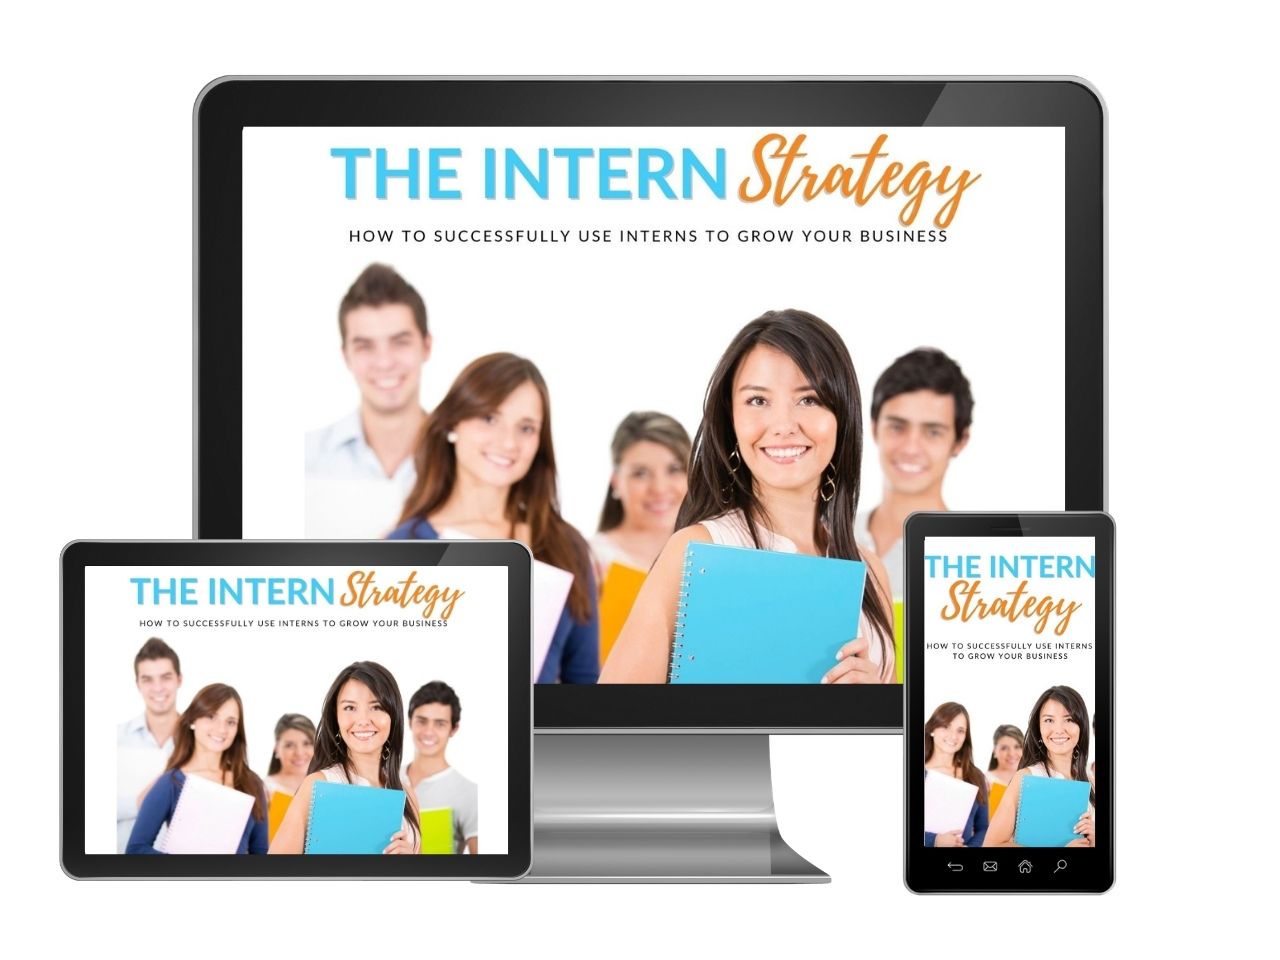 Grouping of course images for how bloggers can use interns